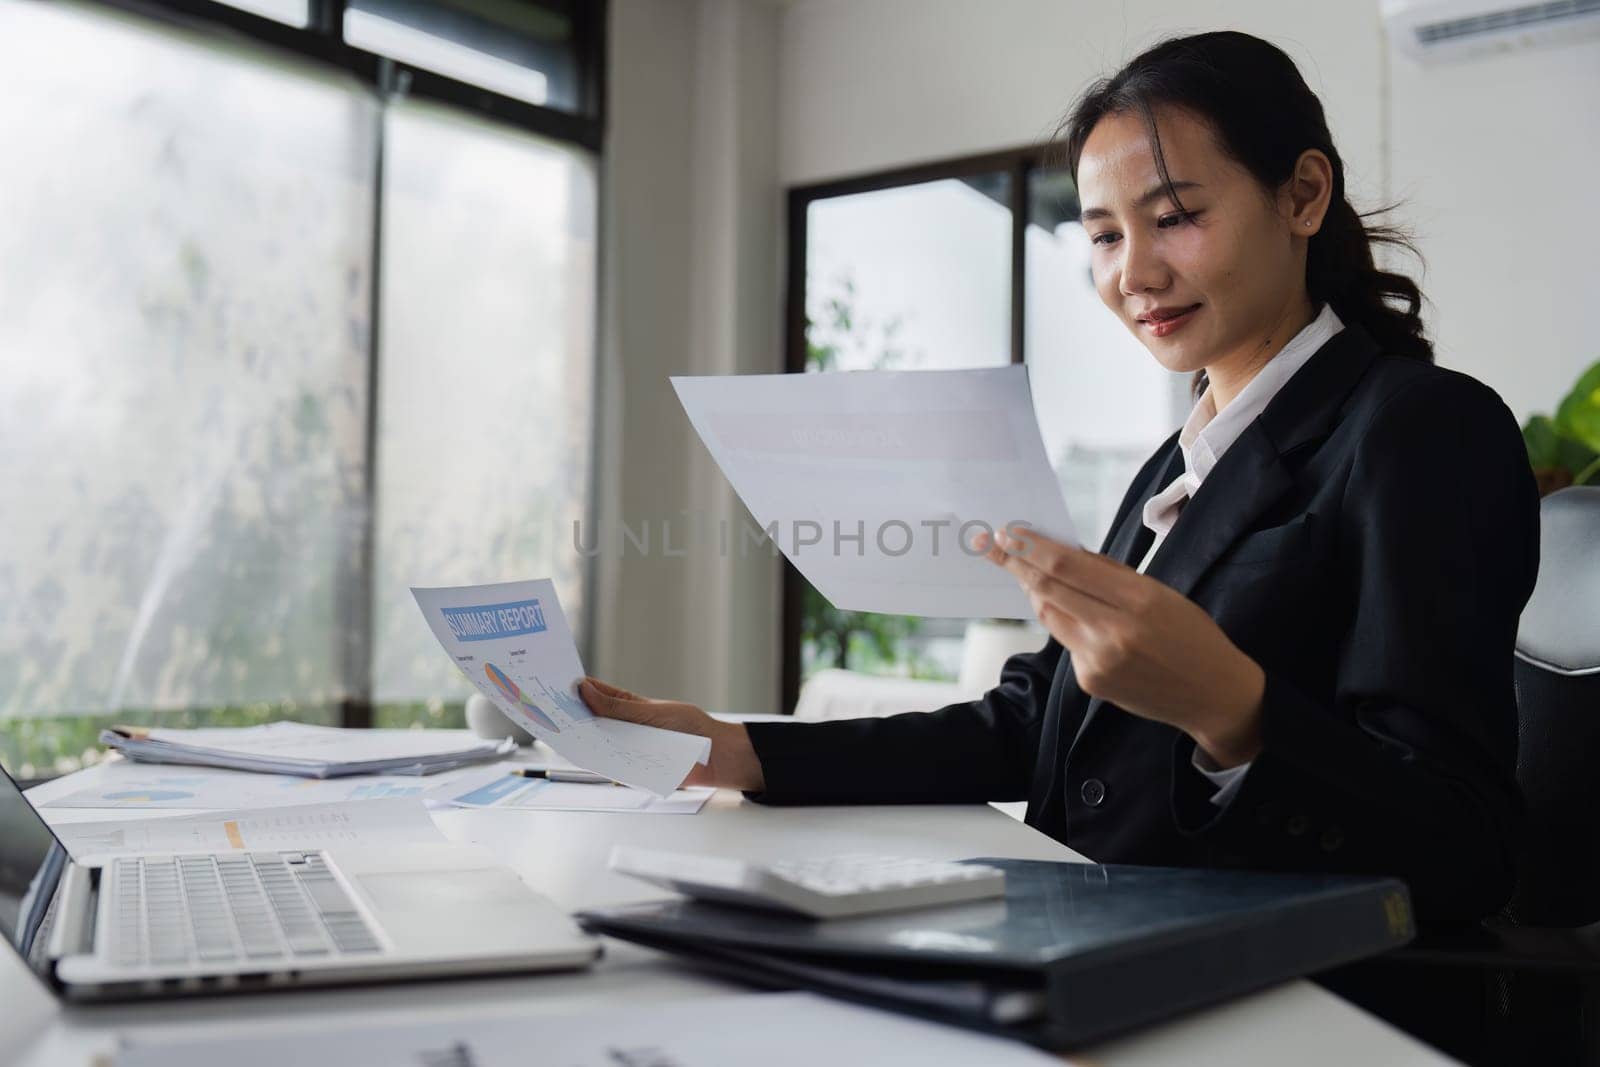 Accountant working on financial data analysis dashboard on paper as marketing indication for business strategic planning by itchaznong